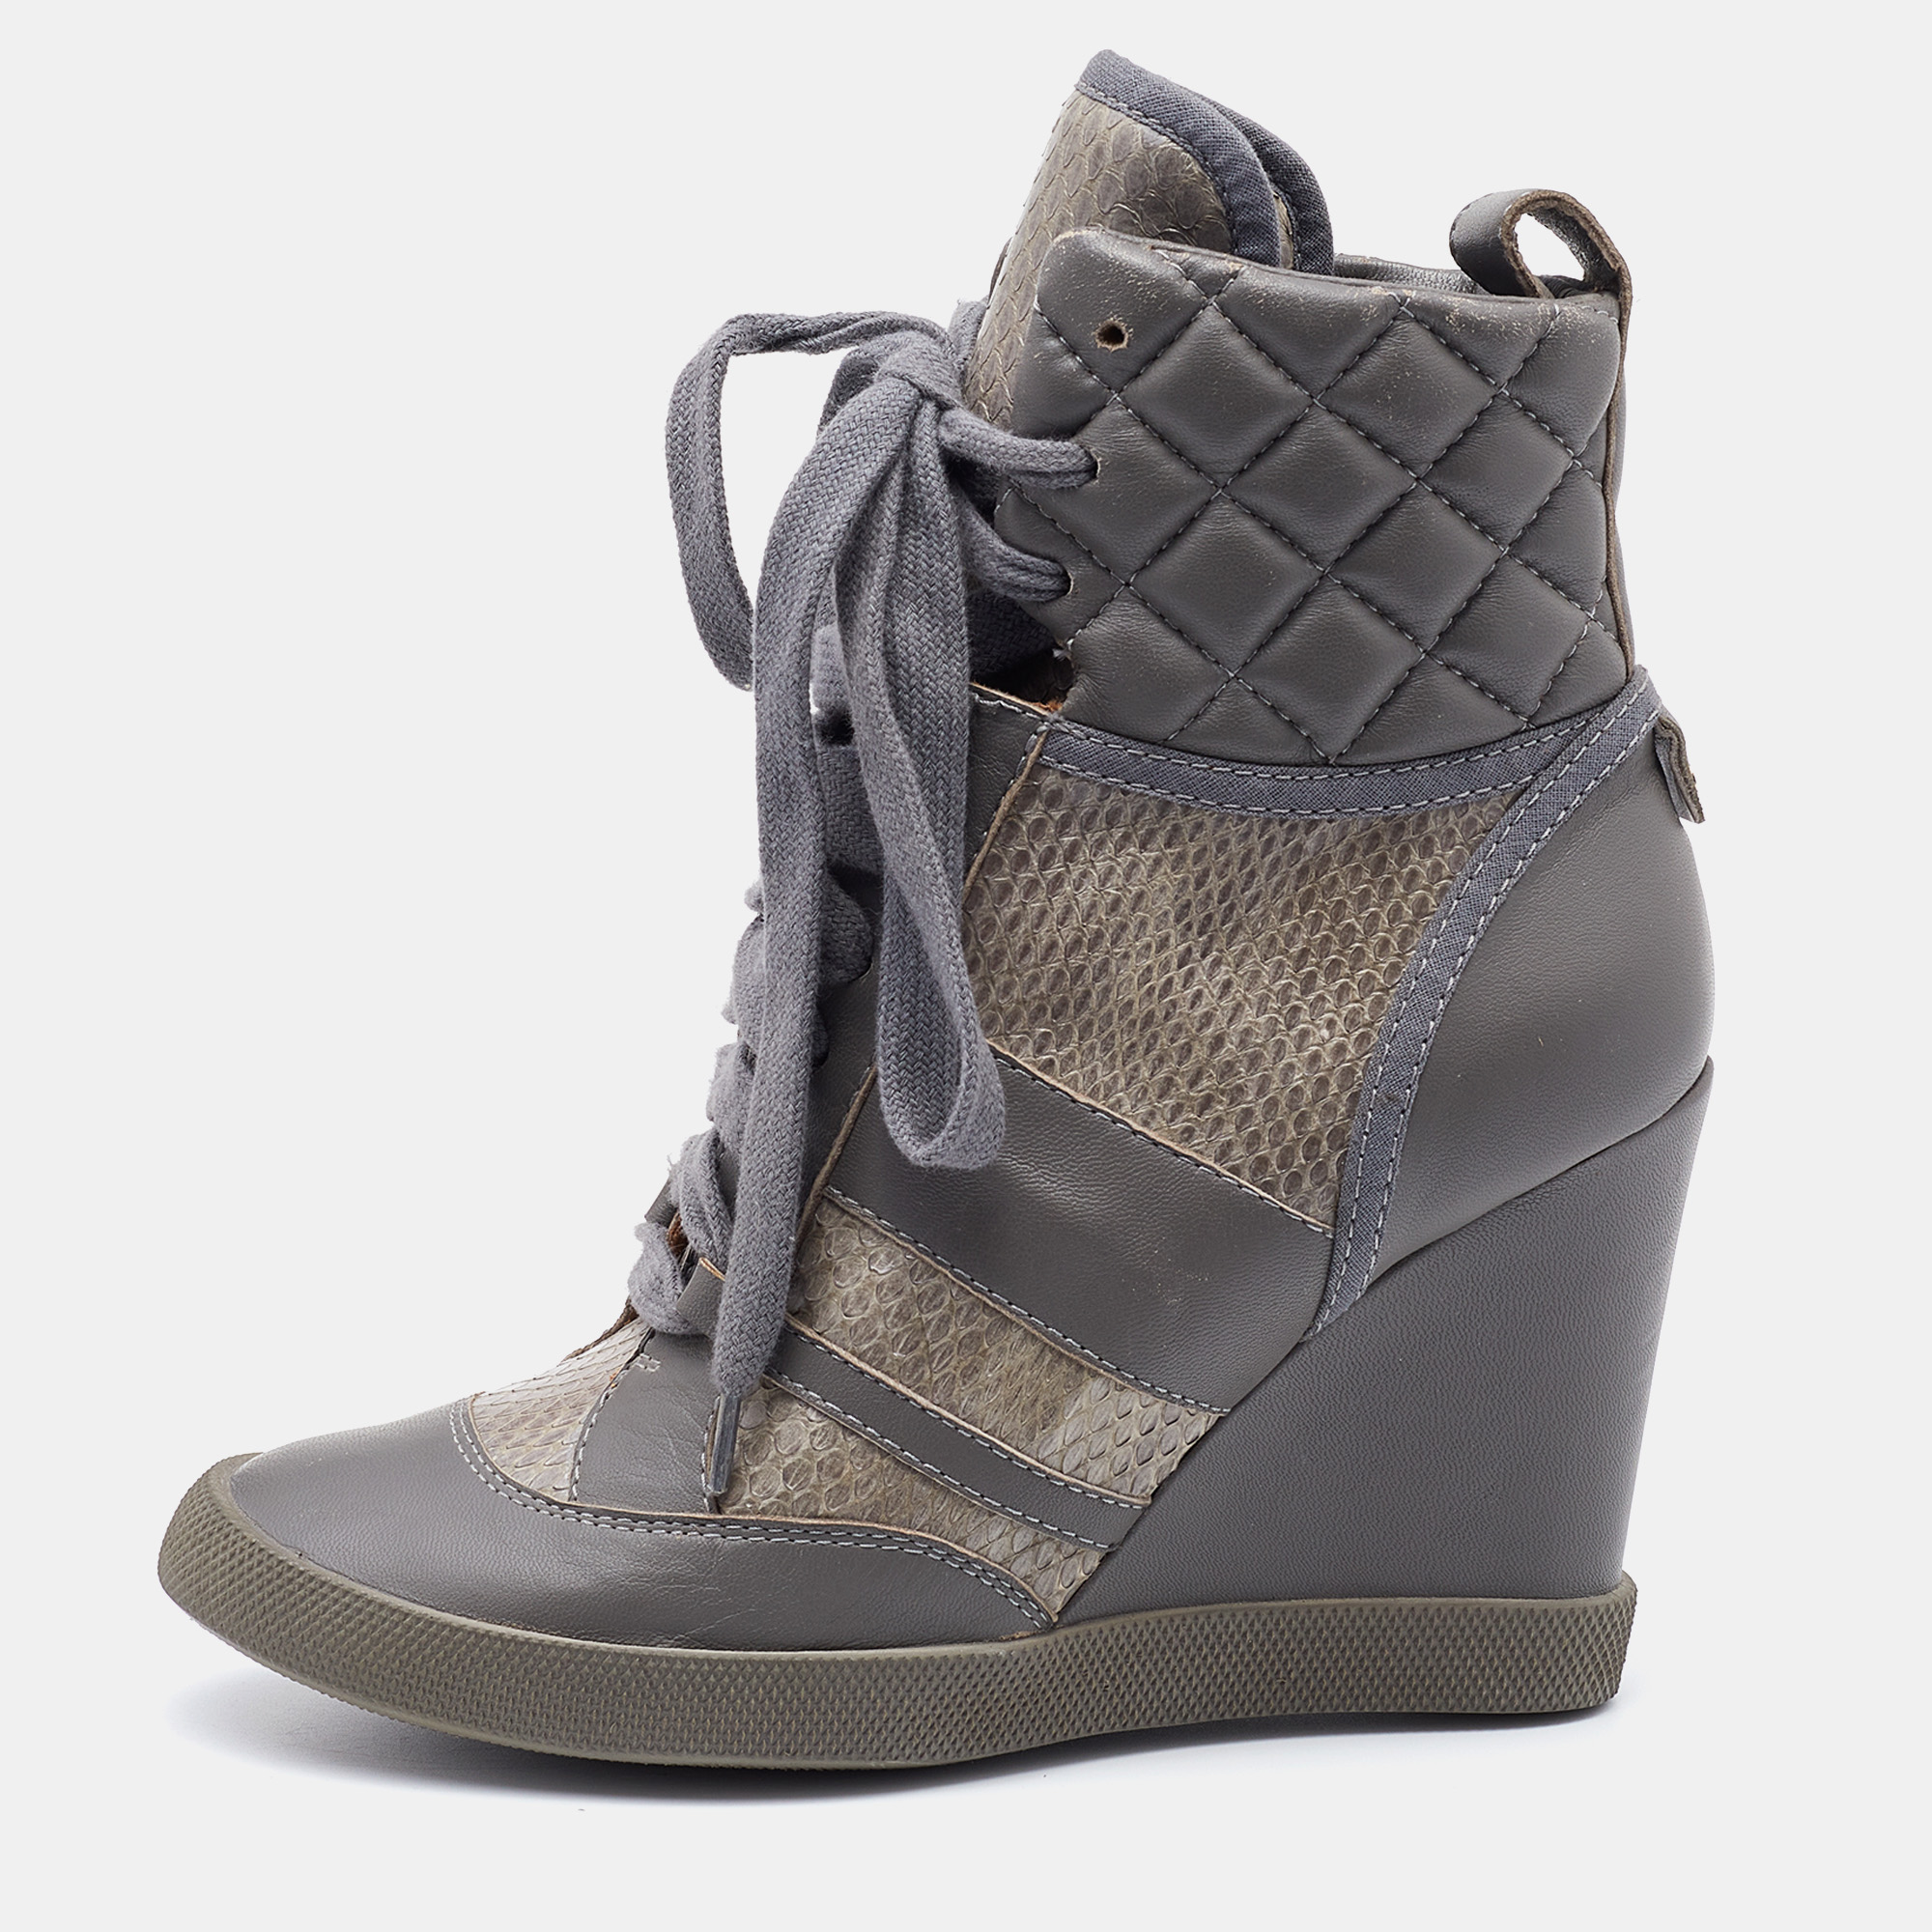 Chloe grey snakeskin and quilted leather wedge sneakers size 37.5